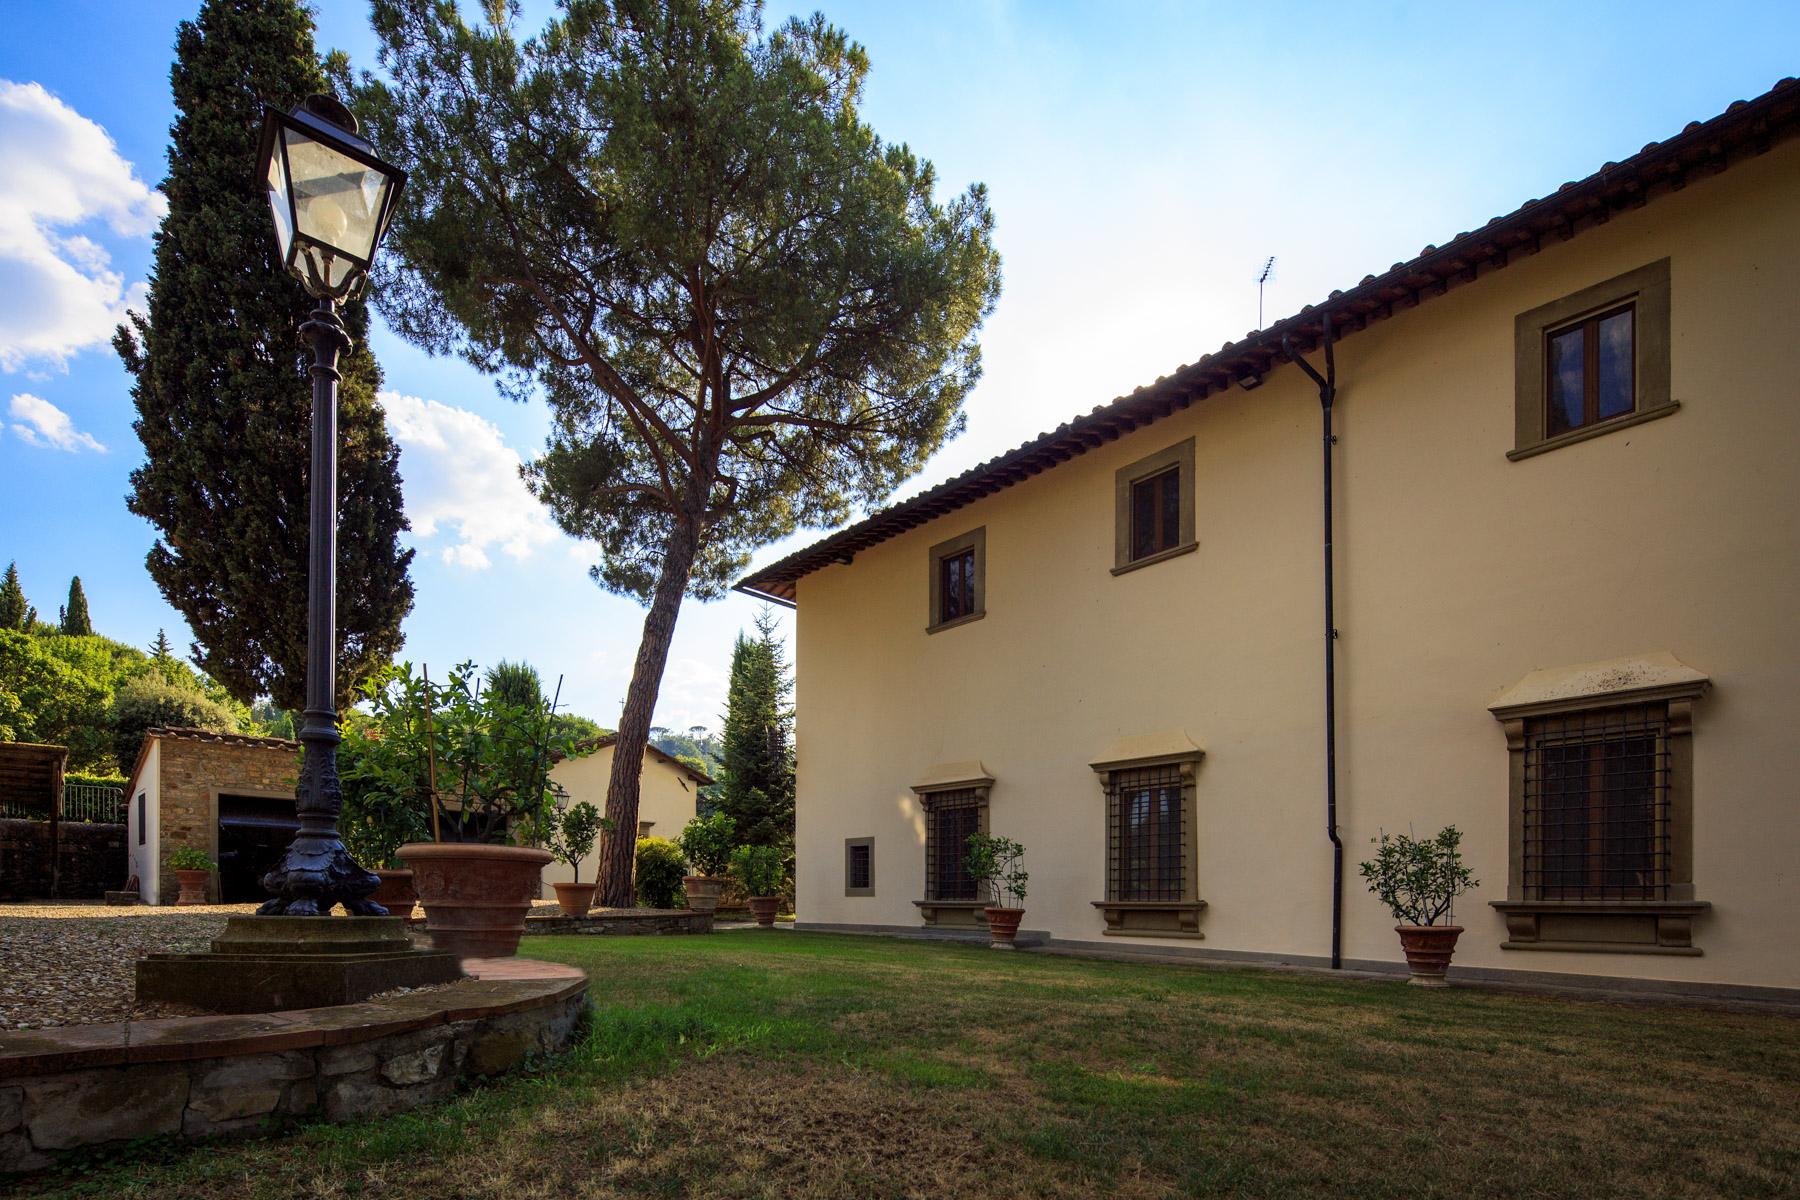 Historic Renaissance Villa with Private Hamlet on the Hills of Florence - 4